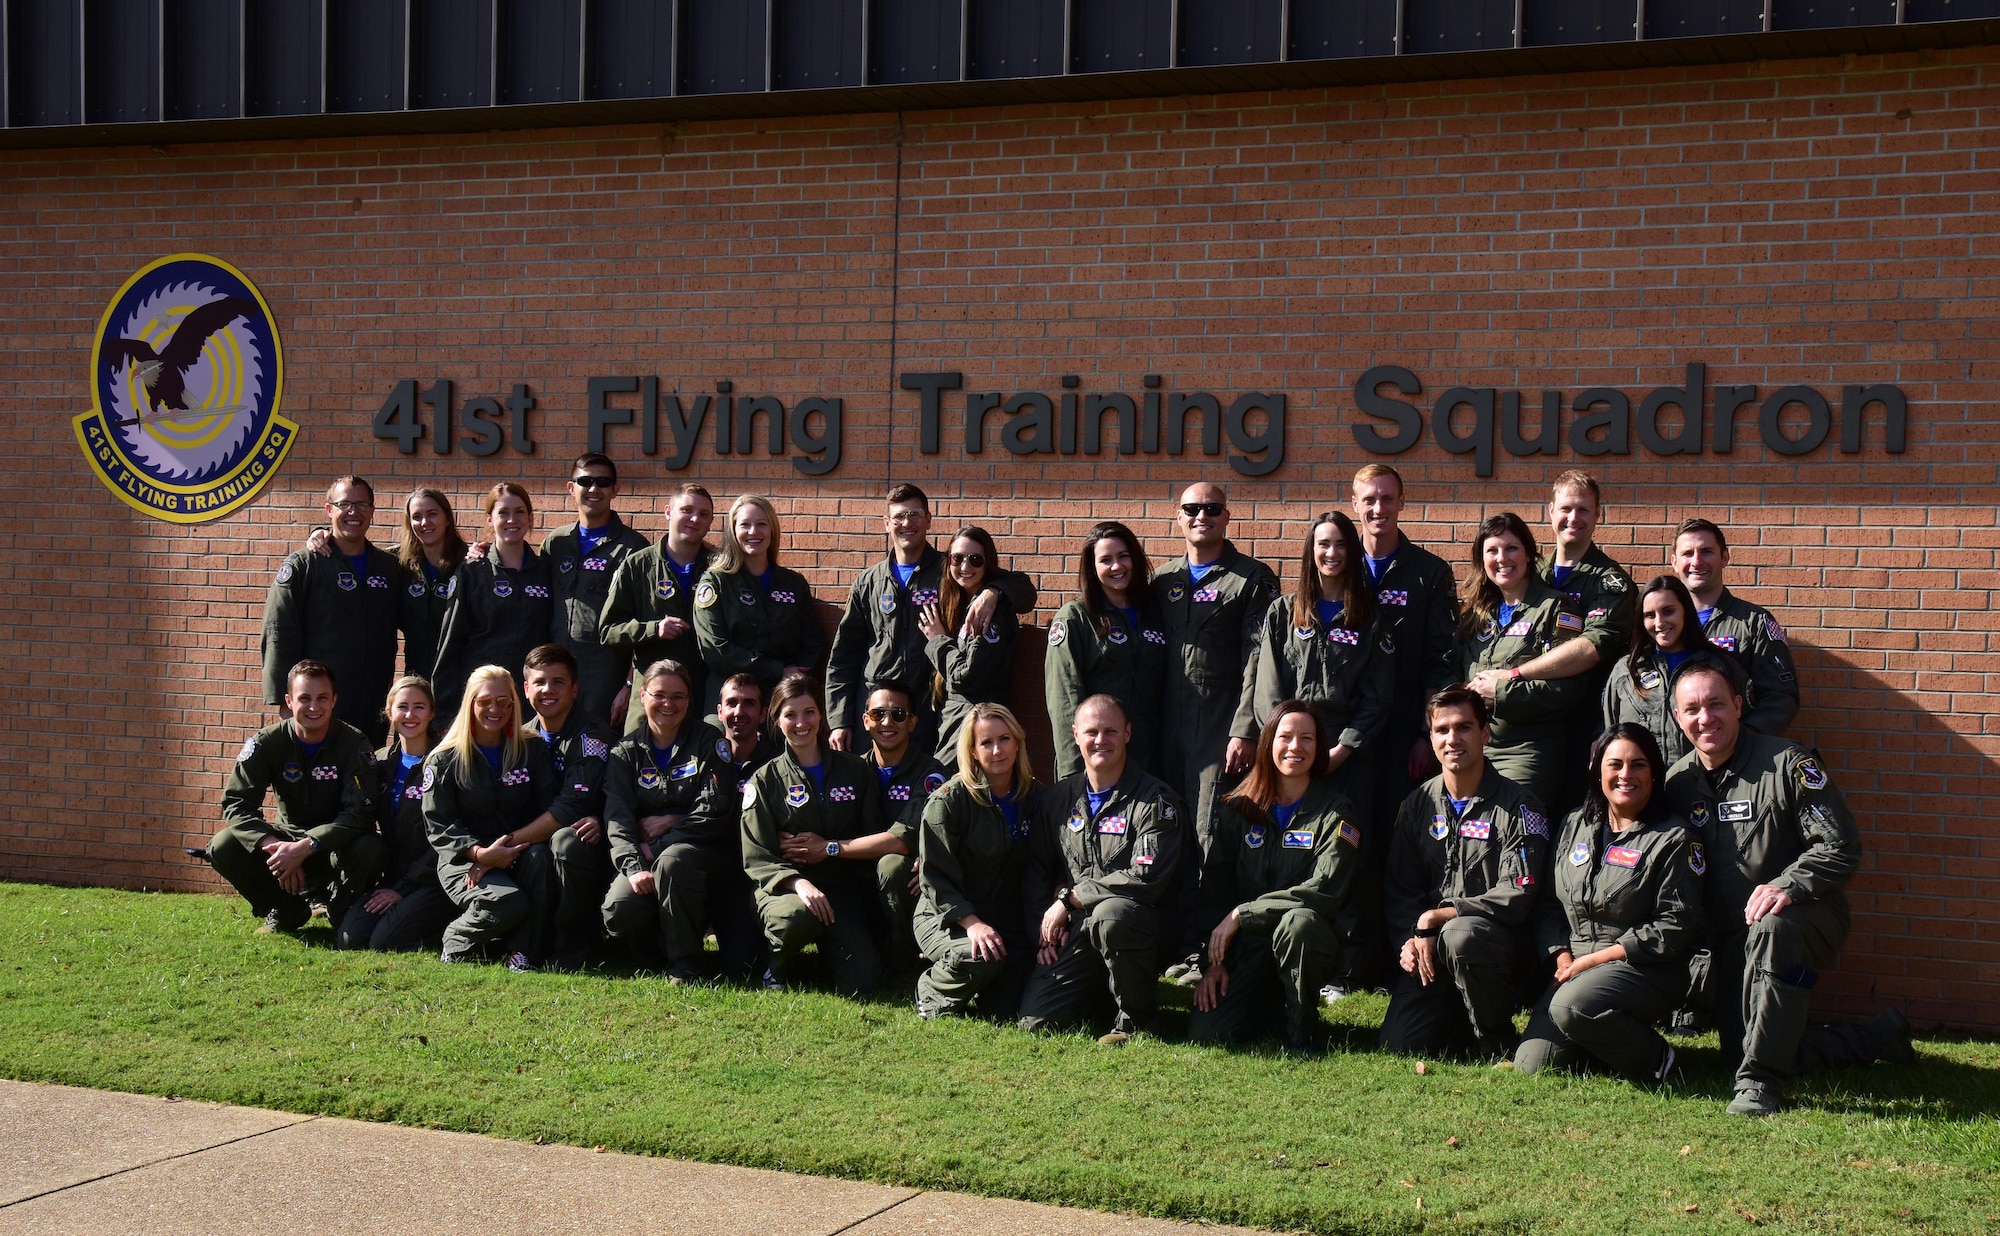 Instructor pilots 41st Flying Training Squadron stand with their spouses Nov. 2, 2018, on Columbus Air Force Base, Mississippi. Spouse flights are annual for the 14th Operations Group to thank spouses as well as show them firsthand what their uniformed family members do every day at work to complete their mission. (U.S. Air Force photo by Elizabeth Owens)